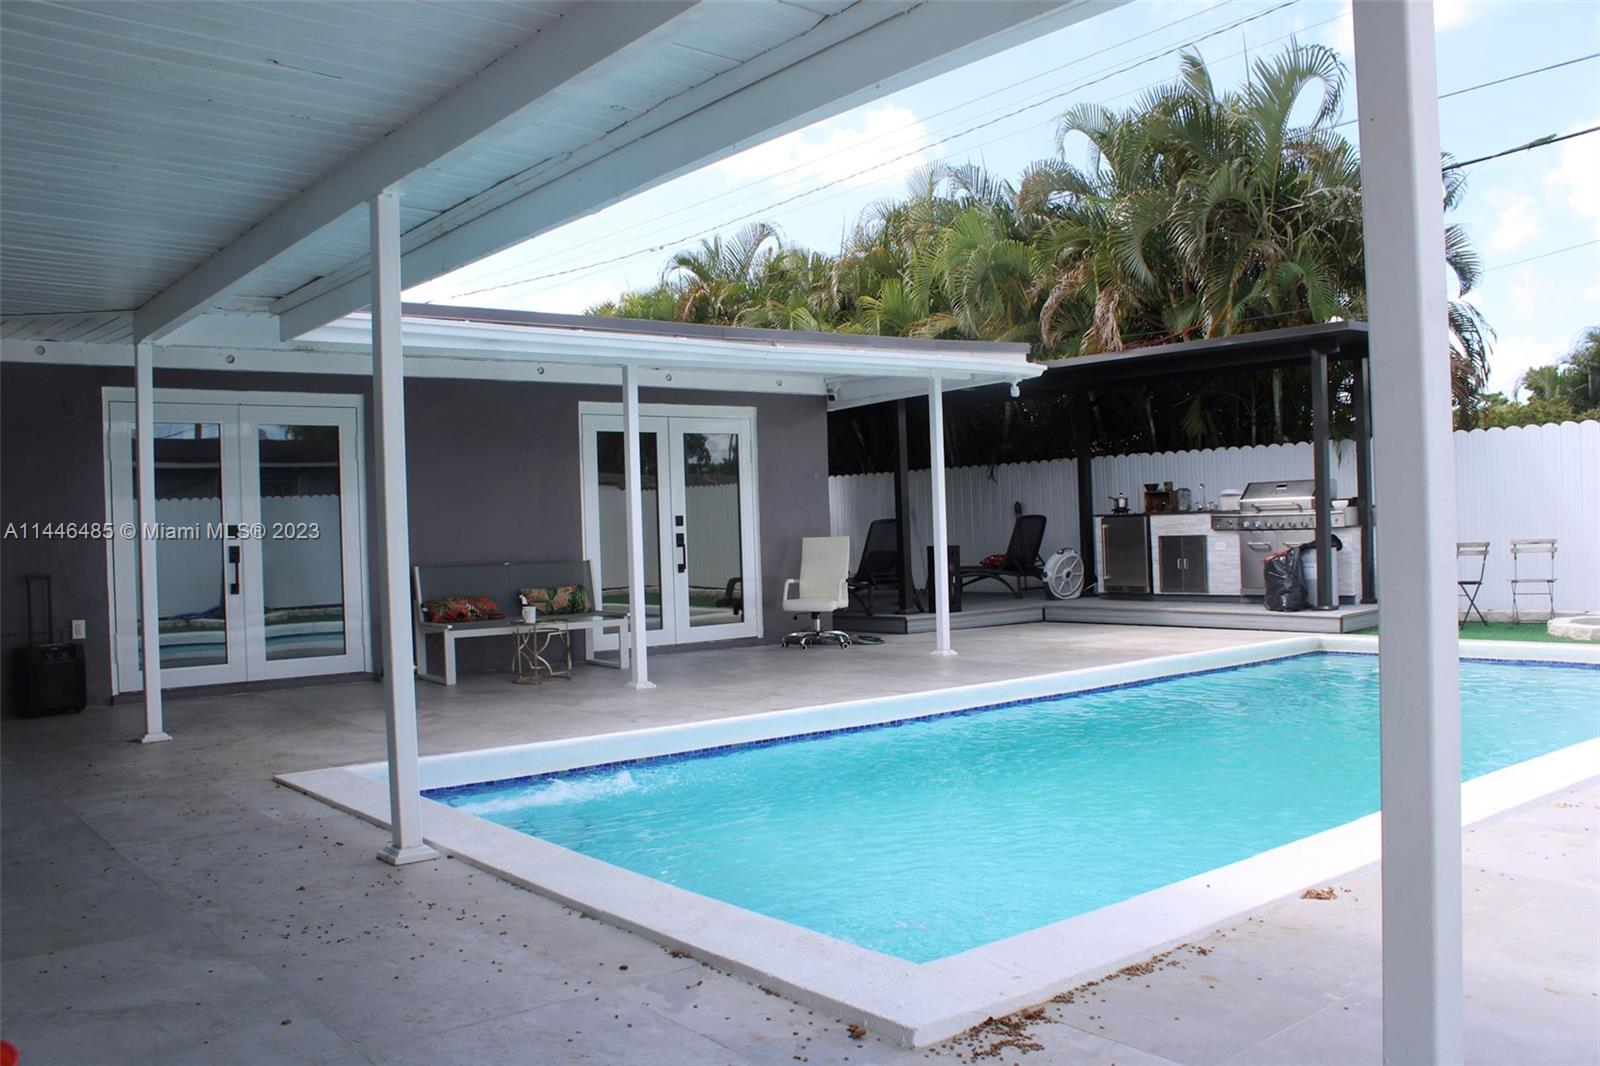 Residential, Hollywood, Florida image 1